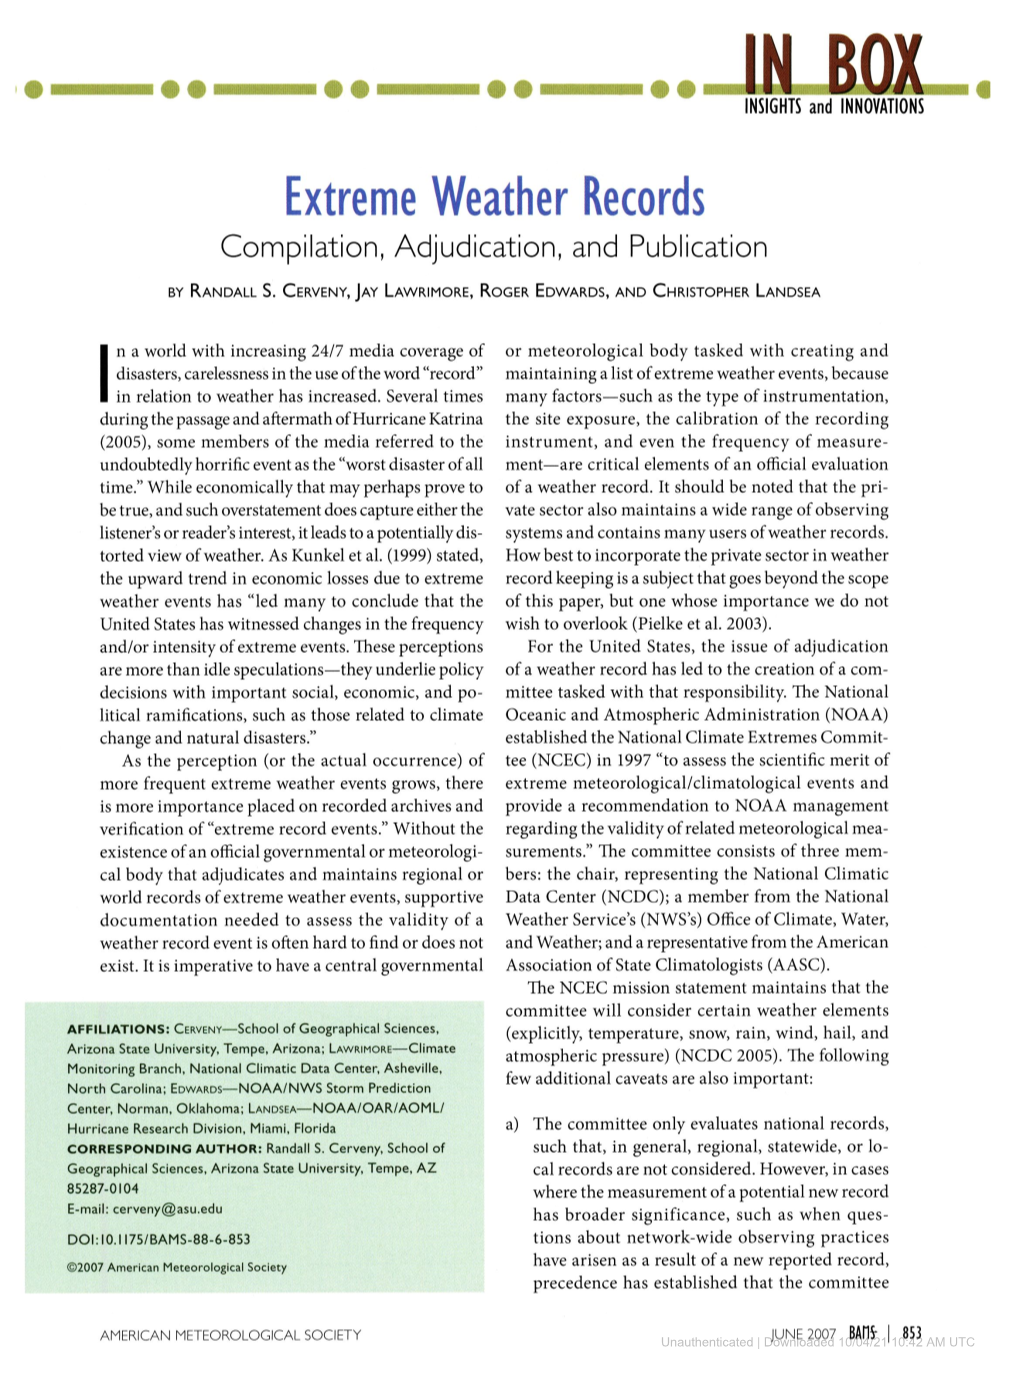 Downloaded 10/04/21 10:42 AM UTC Can Review Such Records As a Means of Addressing to Understand How Climate Is Changing, in Addition These Broader Issues